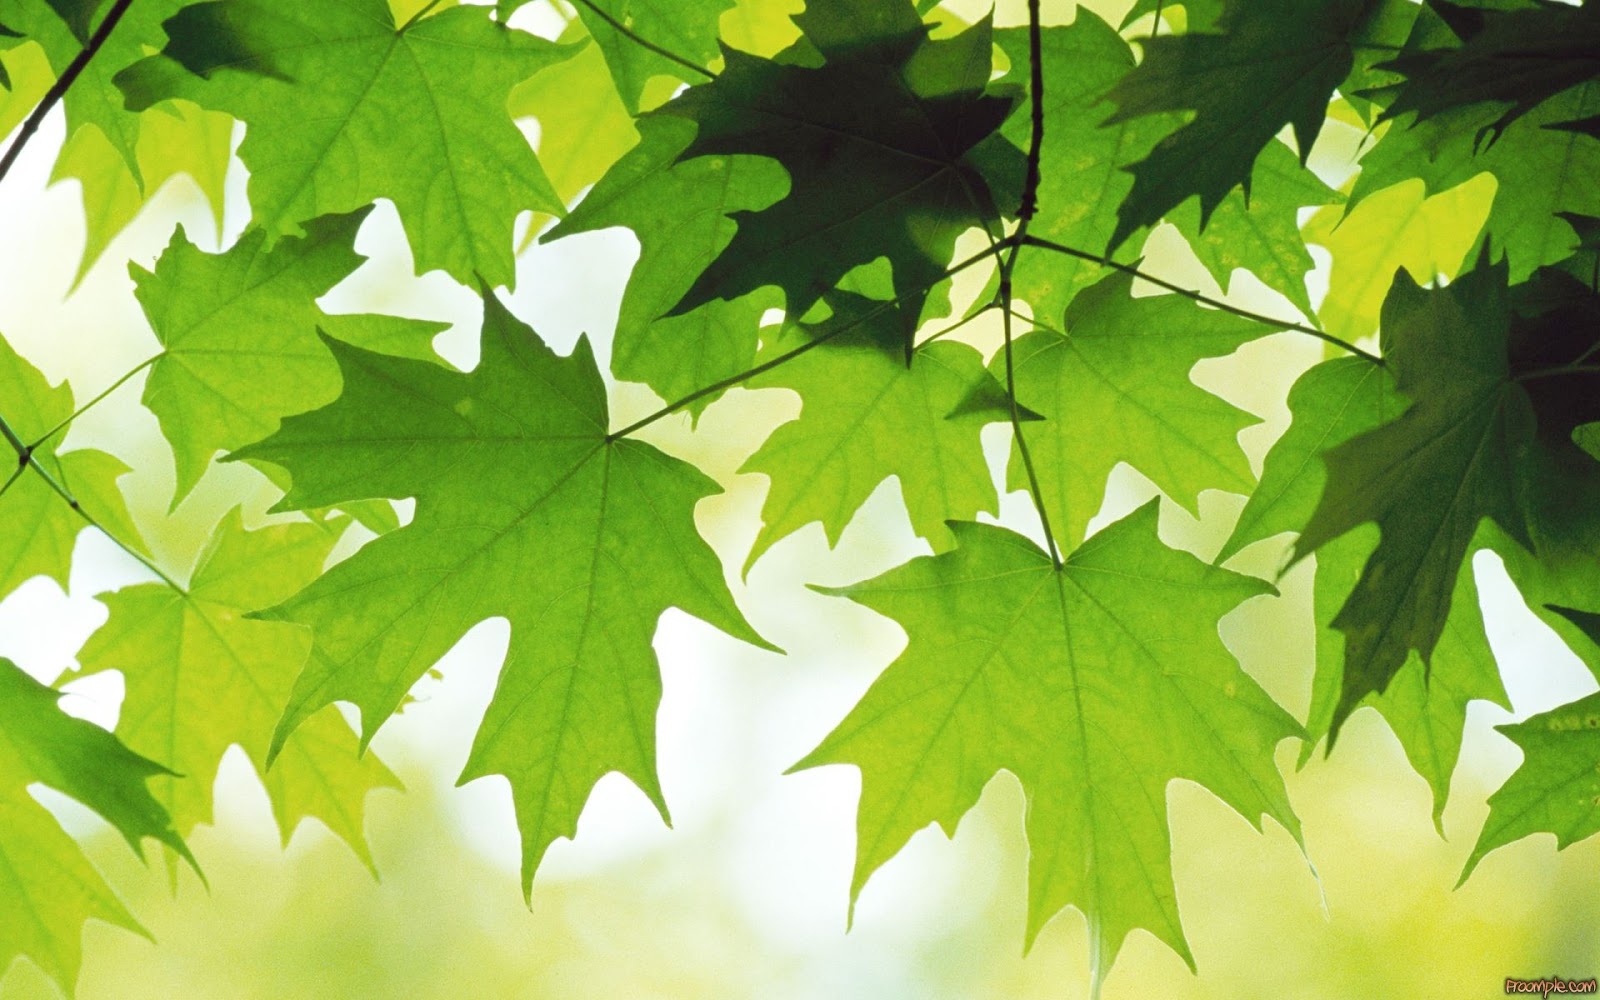 best wallpapers of all time,leaf,black maple,tree,green,maple leaf